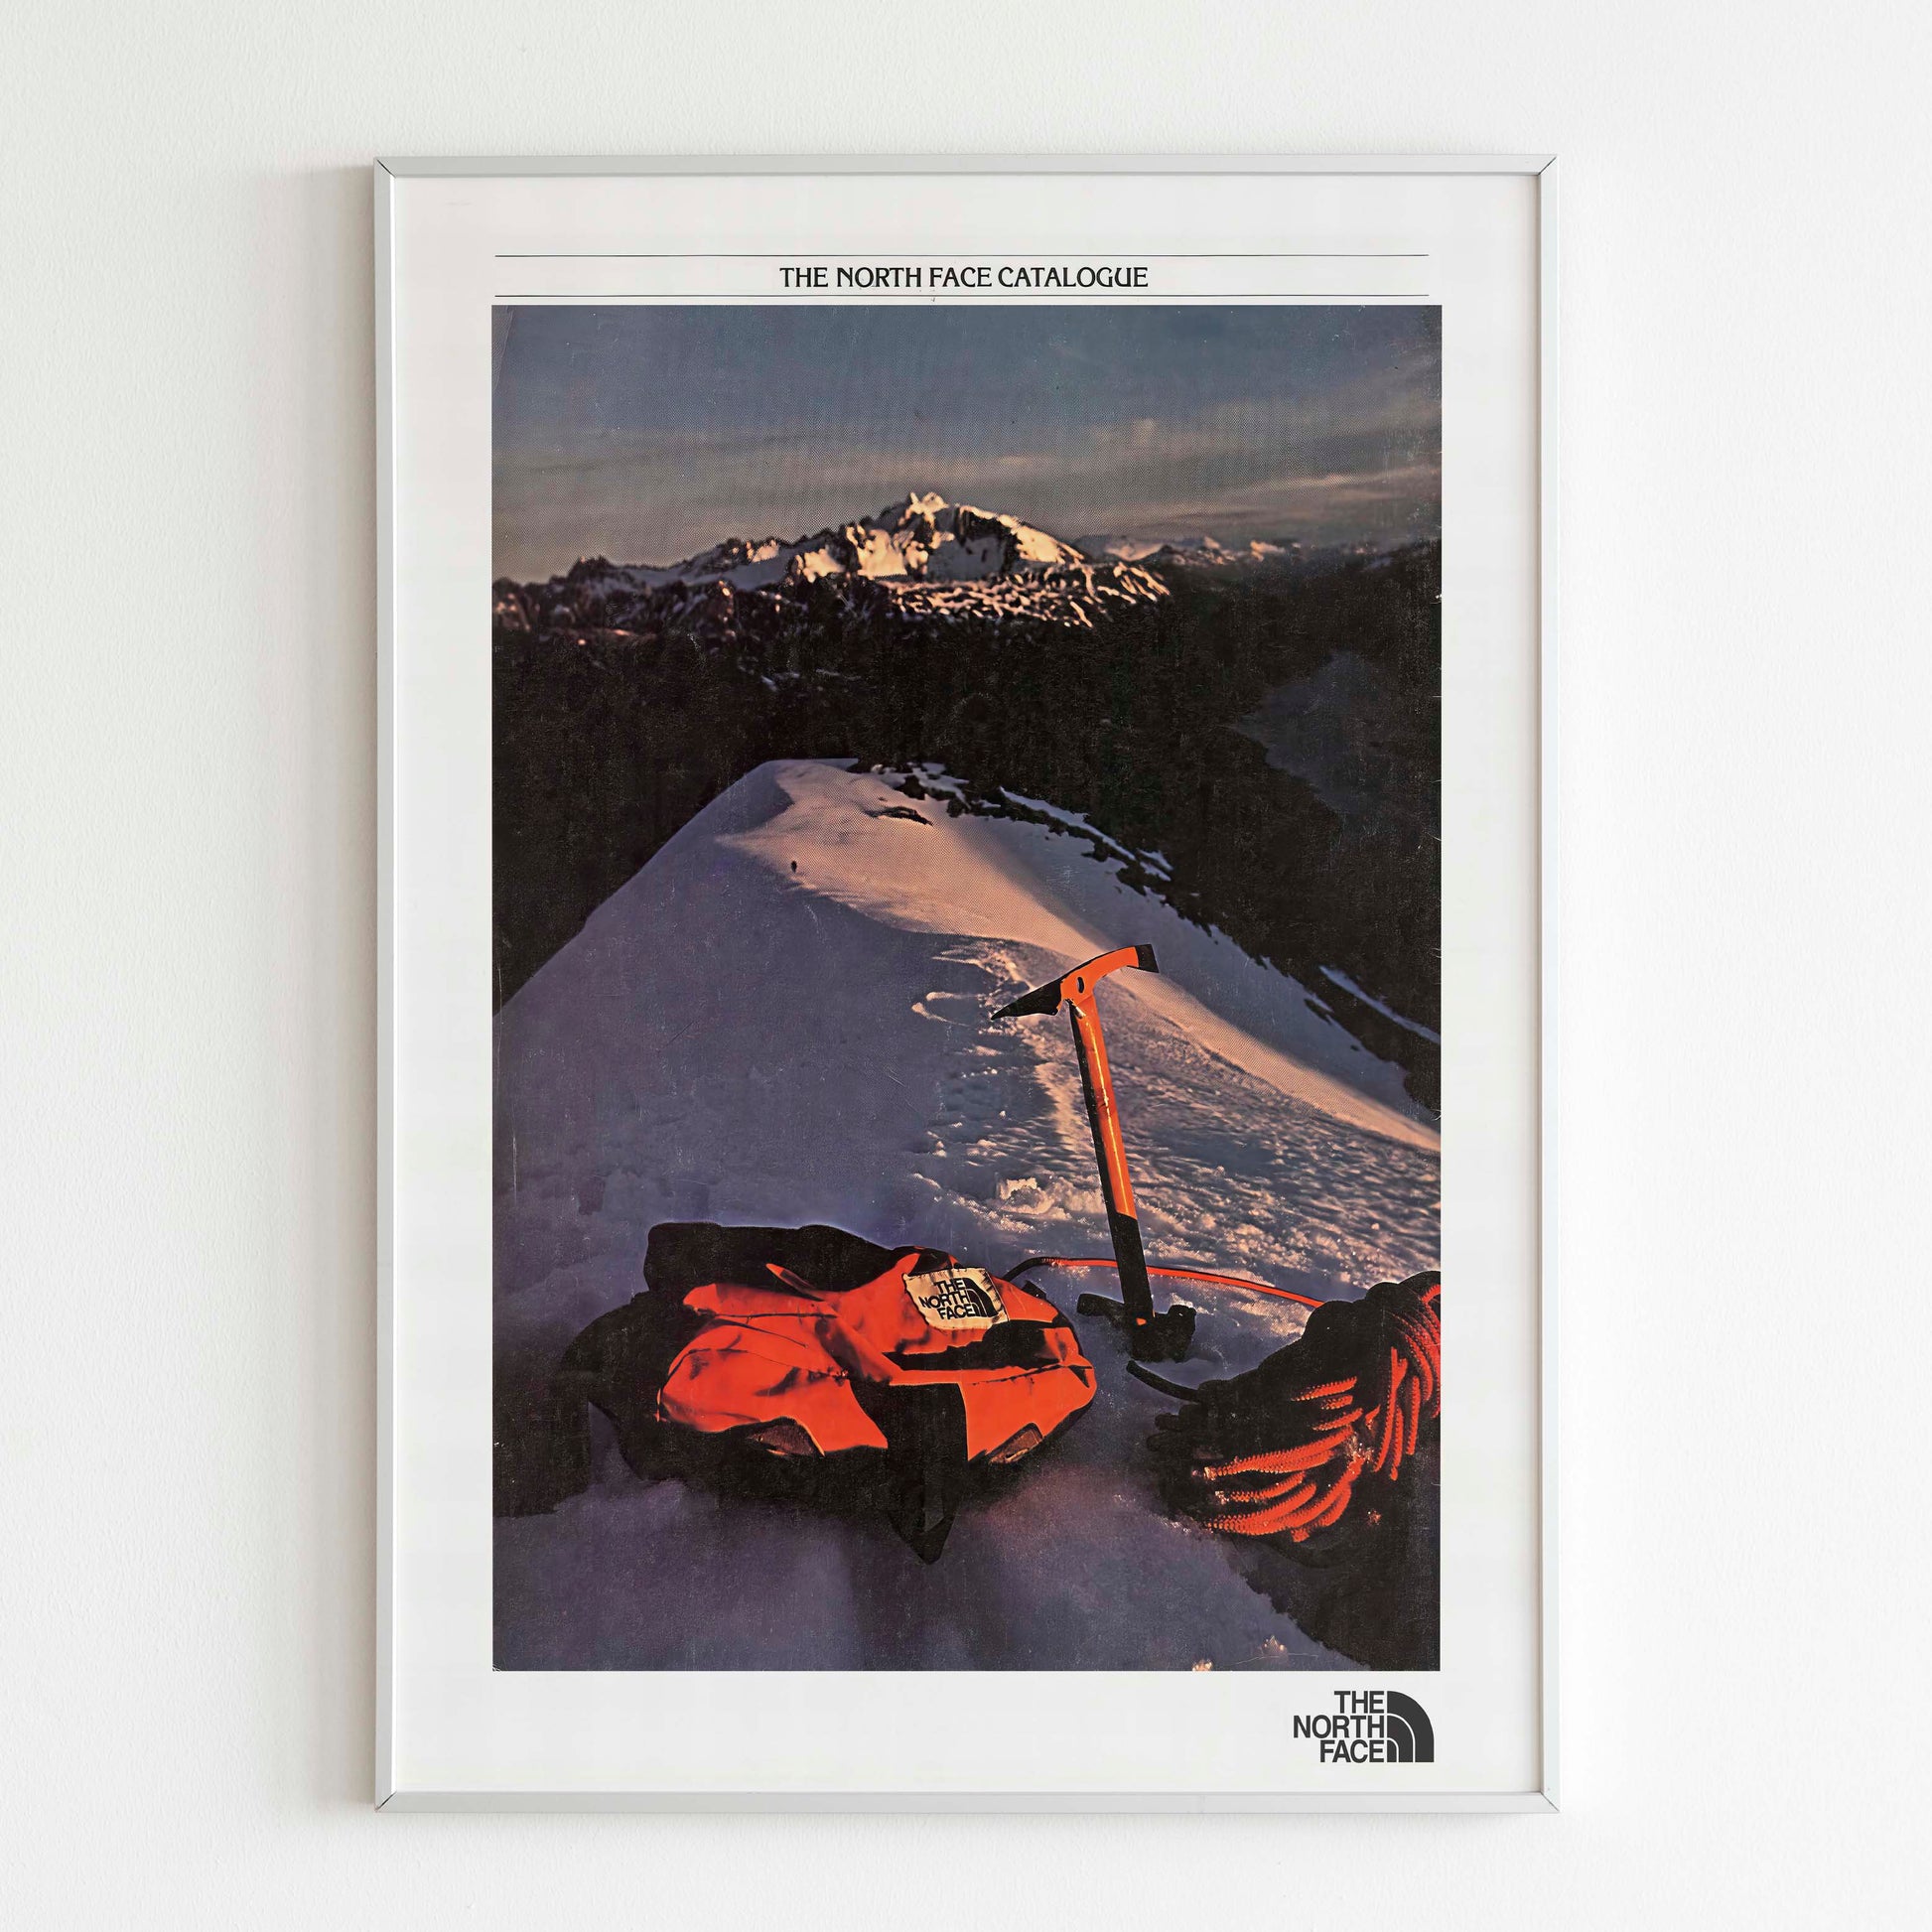 The North Face Catalogue Advertising Poster, 70s Style Outdoor Print, Vintage Ad Wall Art, Magazine Retro Advertisement, TNF 90s retro Ad